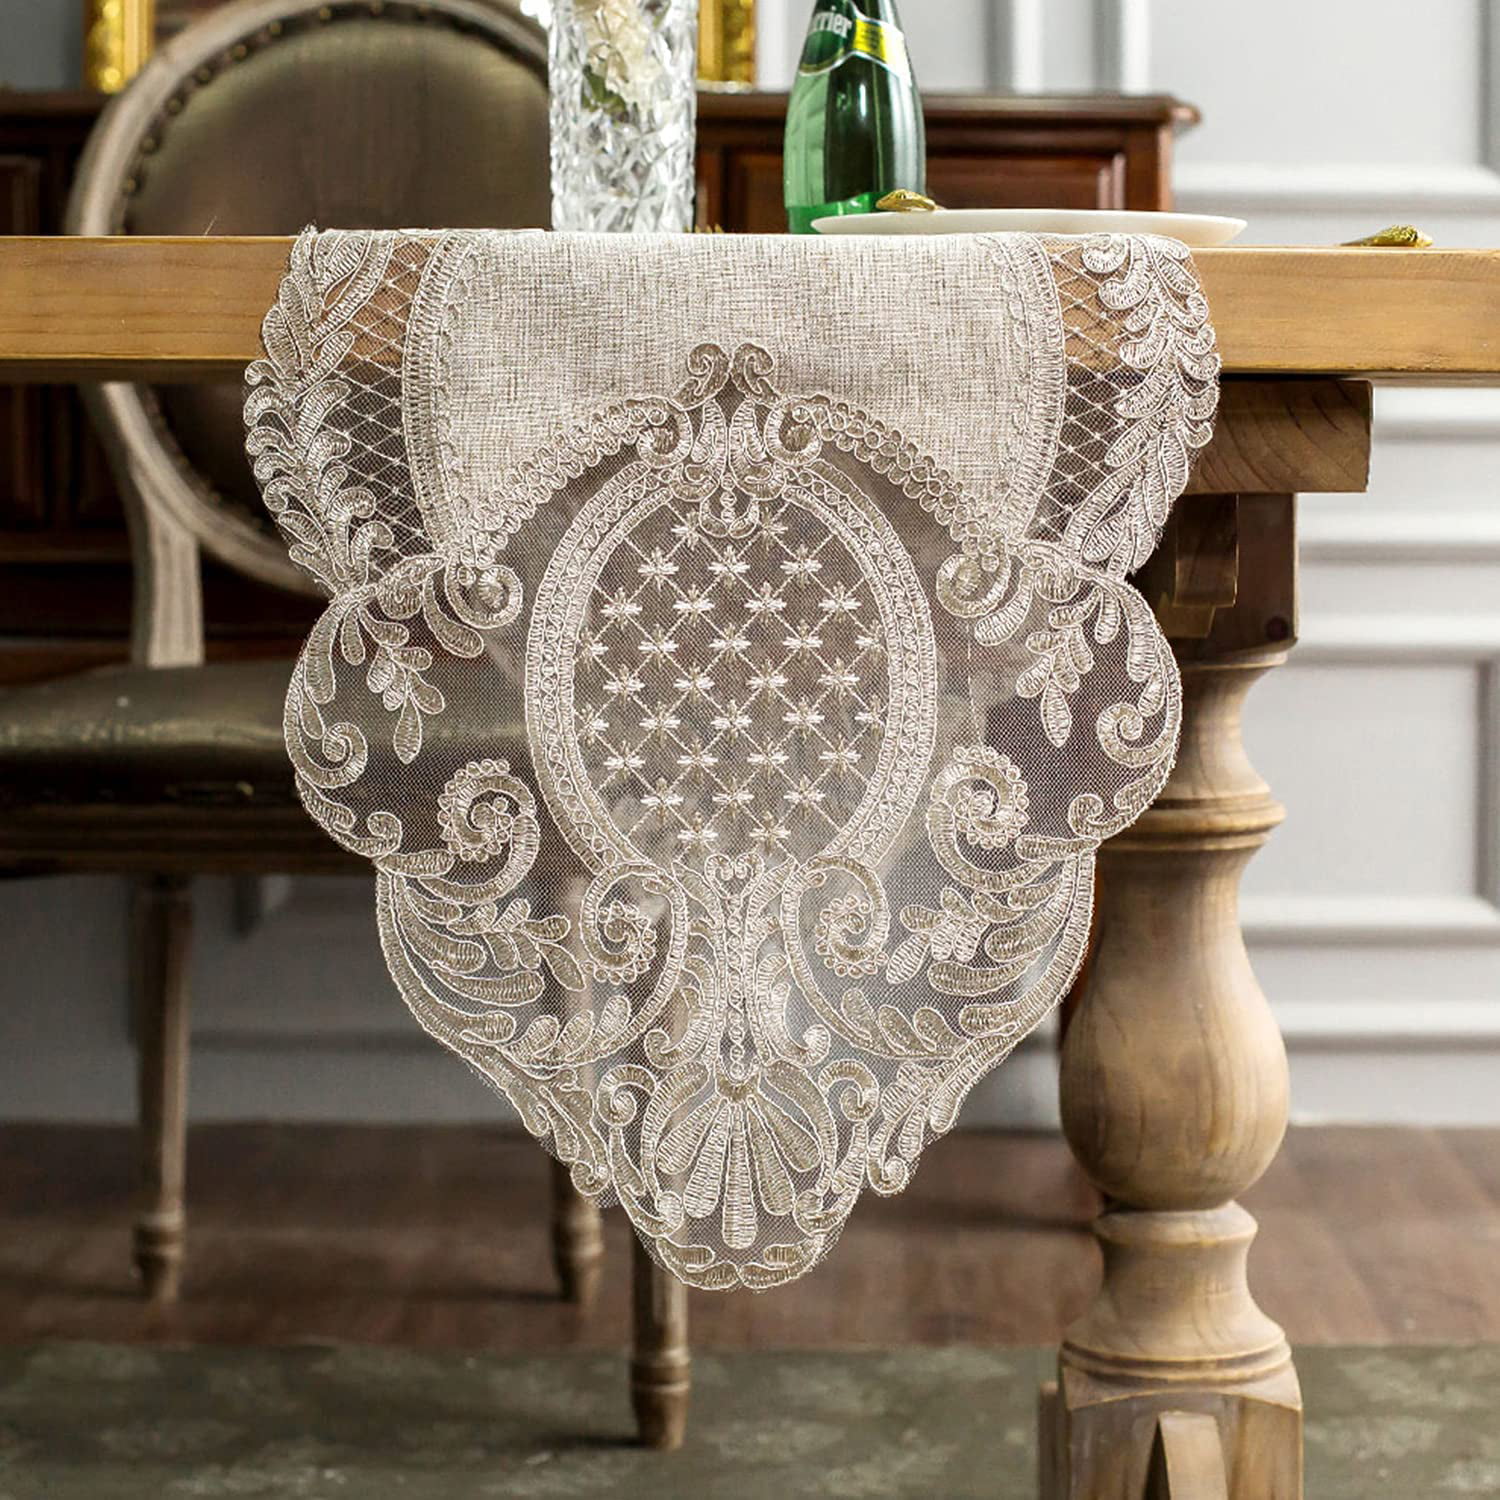 Tablecloth Table Runner Medium Blanket Doilies Embroidery Black White Linen Look 